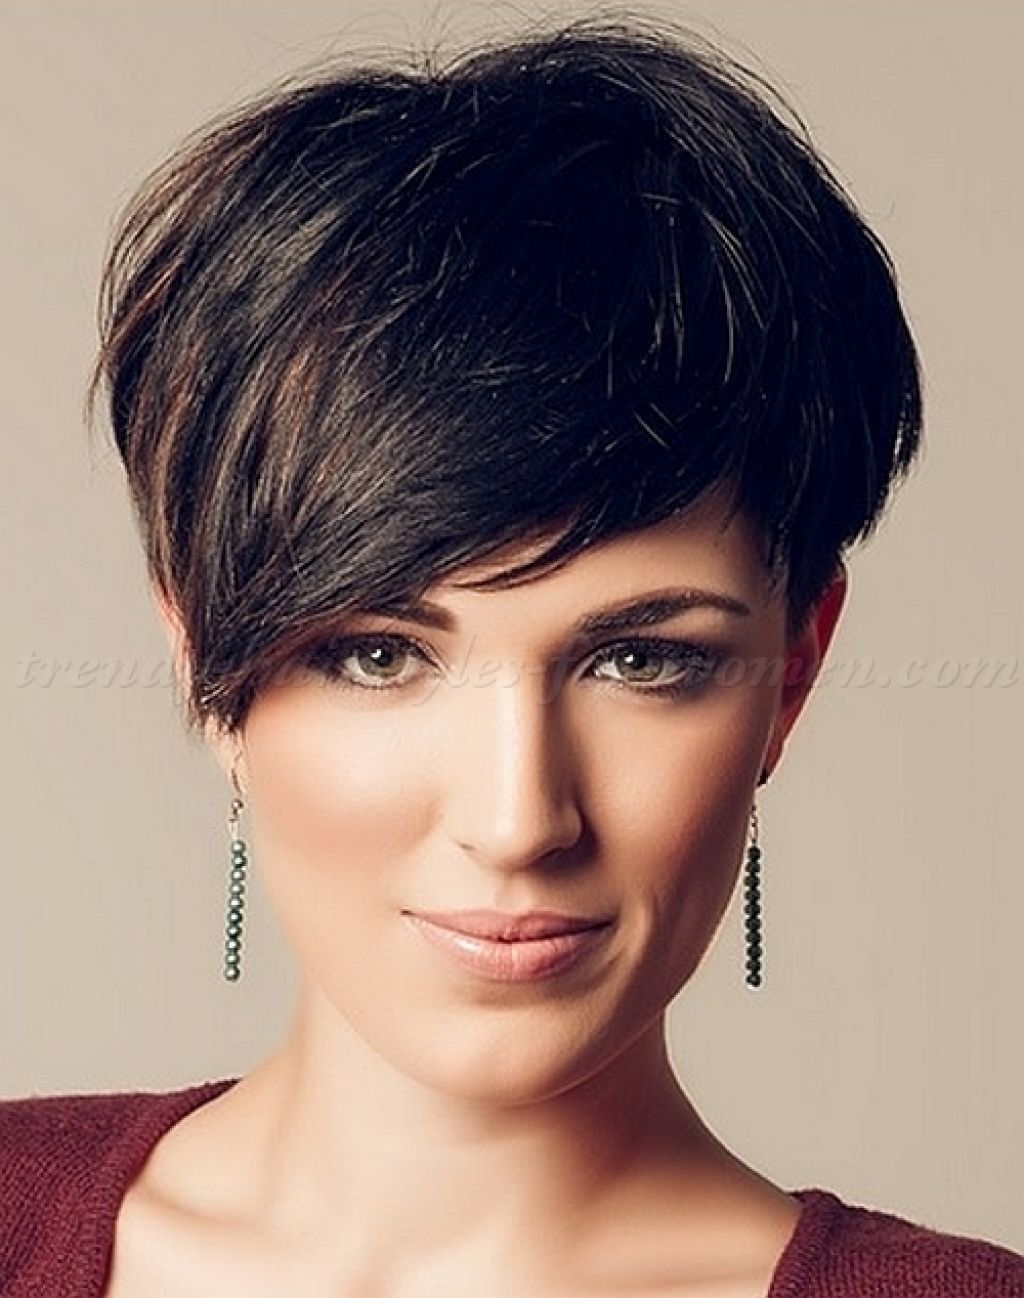 Image Result For Asymmetrical Short Haircuts | Look | Pinterest Within Asymmetrical Short Haircuts For Women (View 17 of 25)